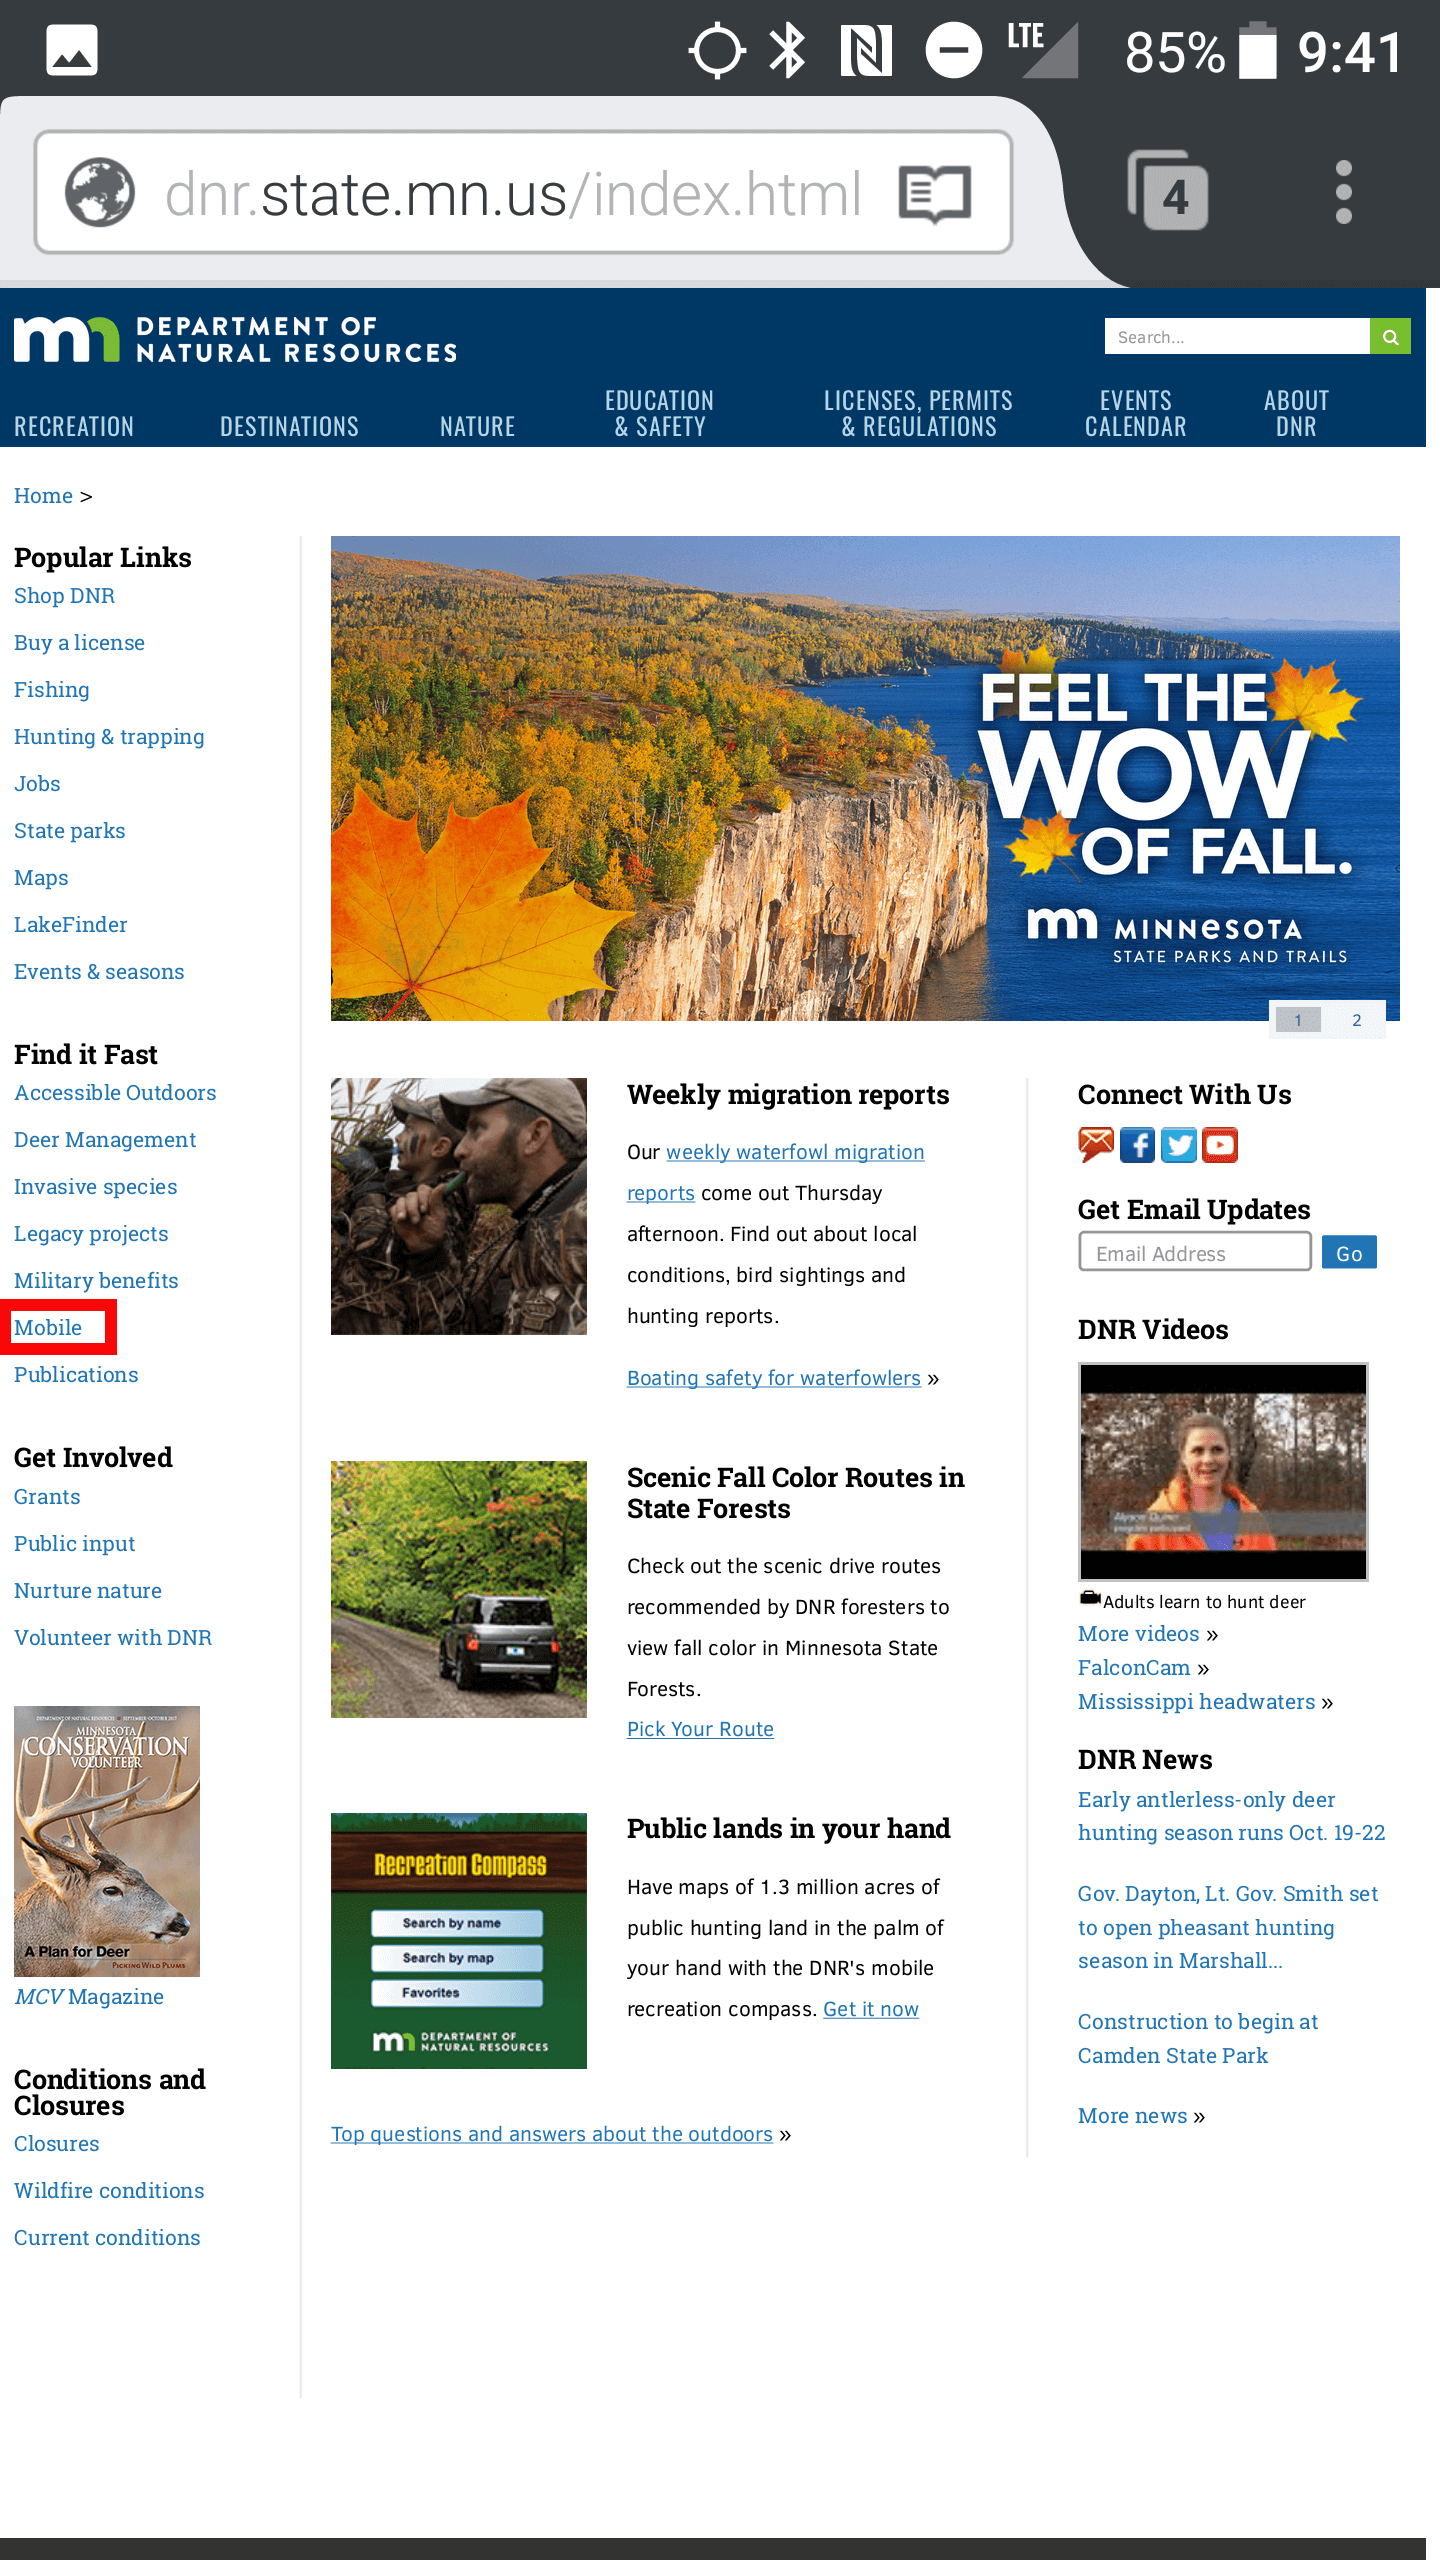 The MN Department of Natural Resources home page with the link to mobile web pages boxed in red